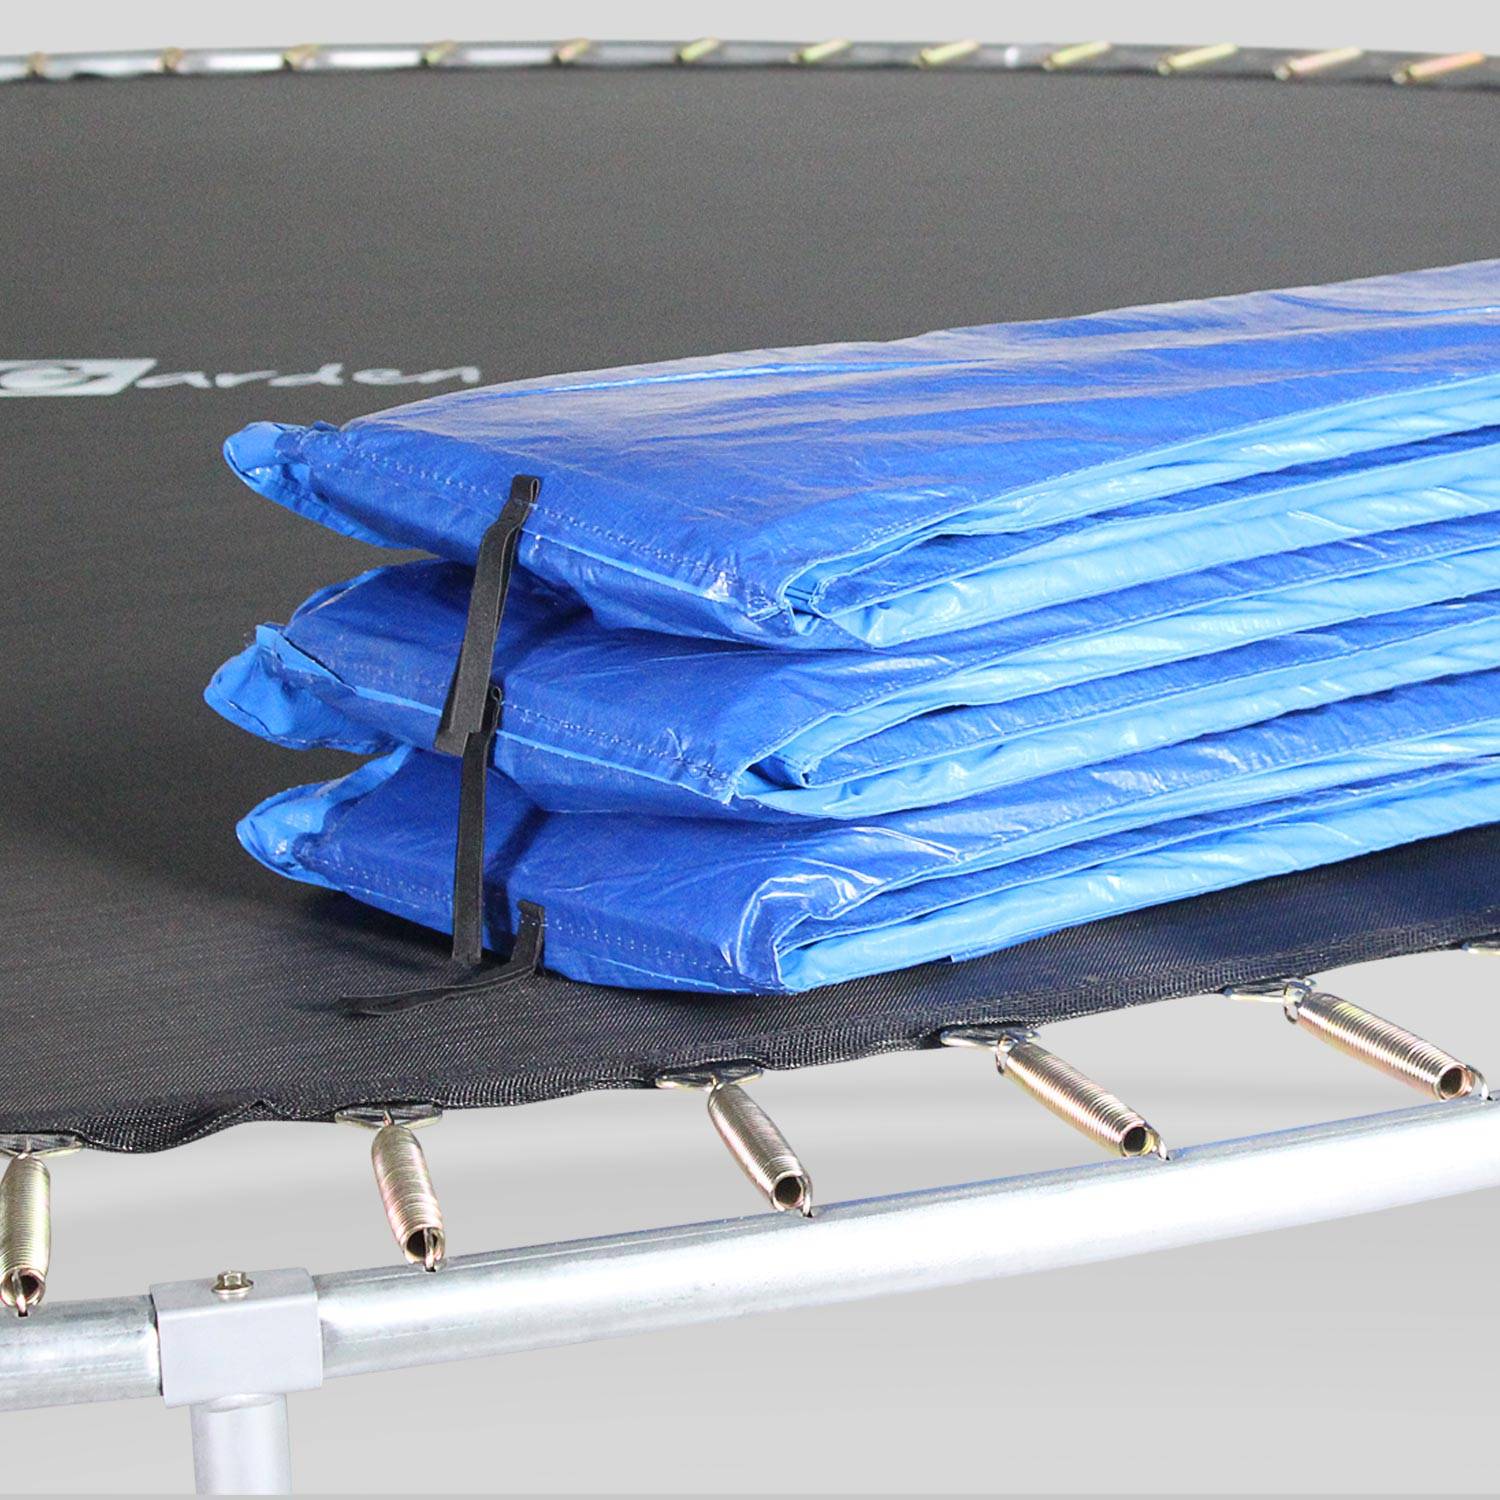 Protective spring cover for trampoline 250cm - 22mm - Blue,sweeek,Photo2